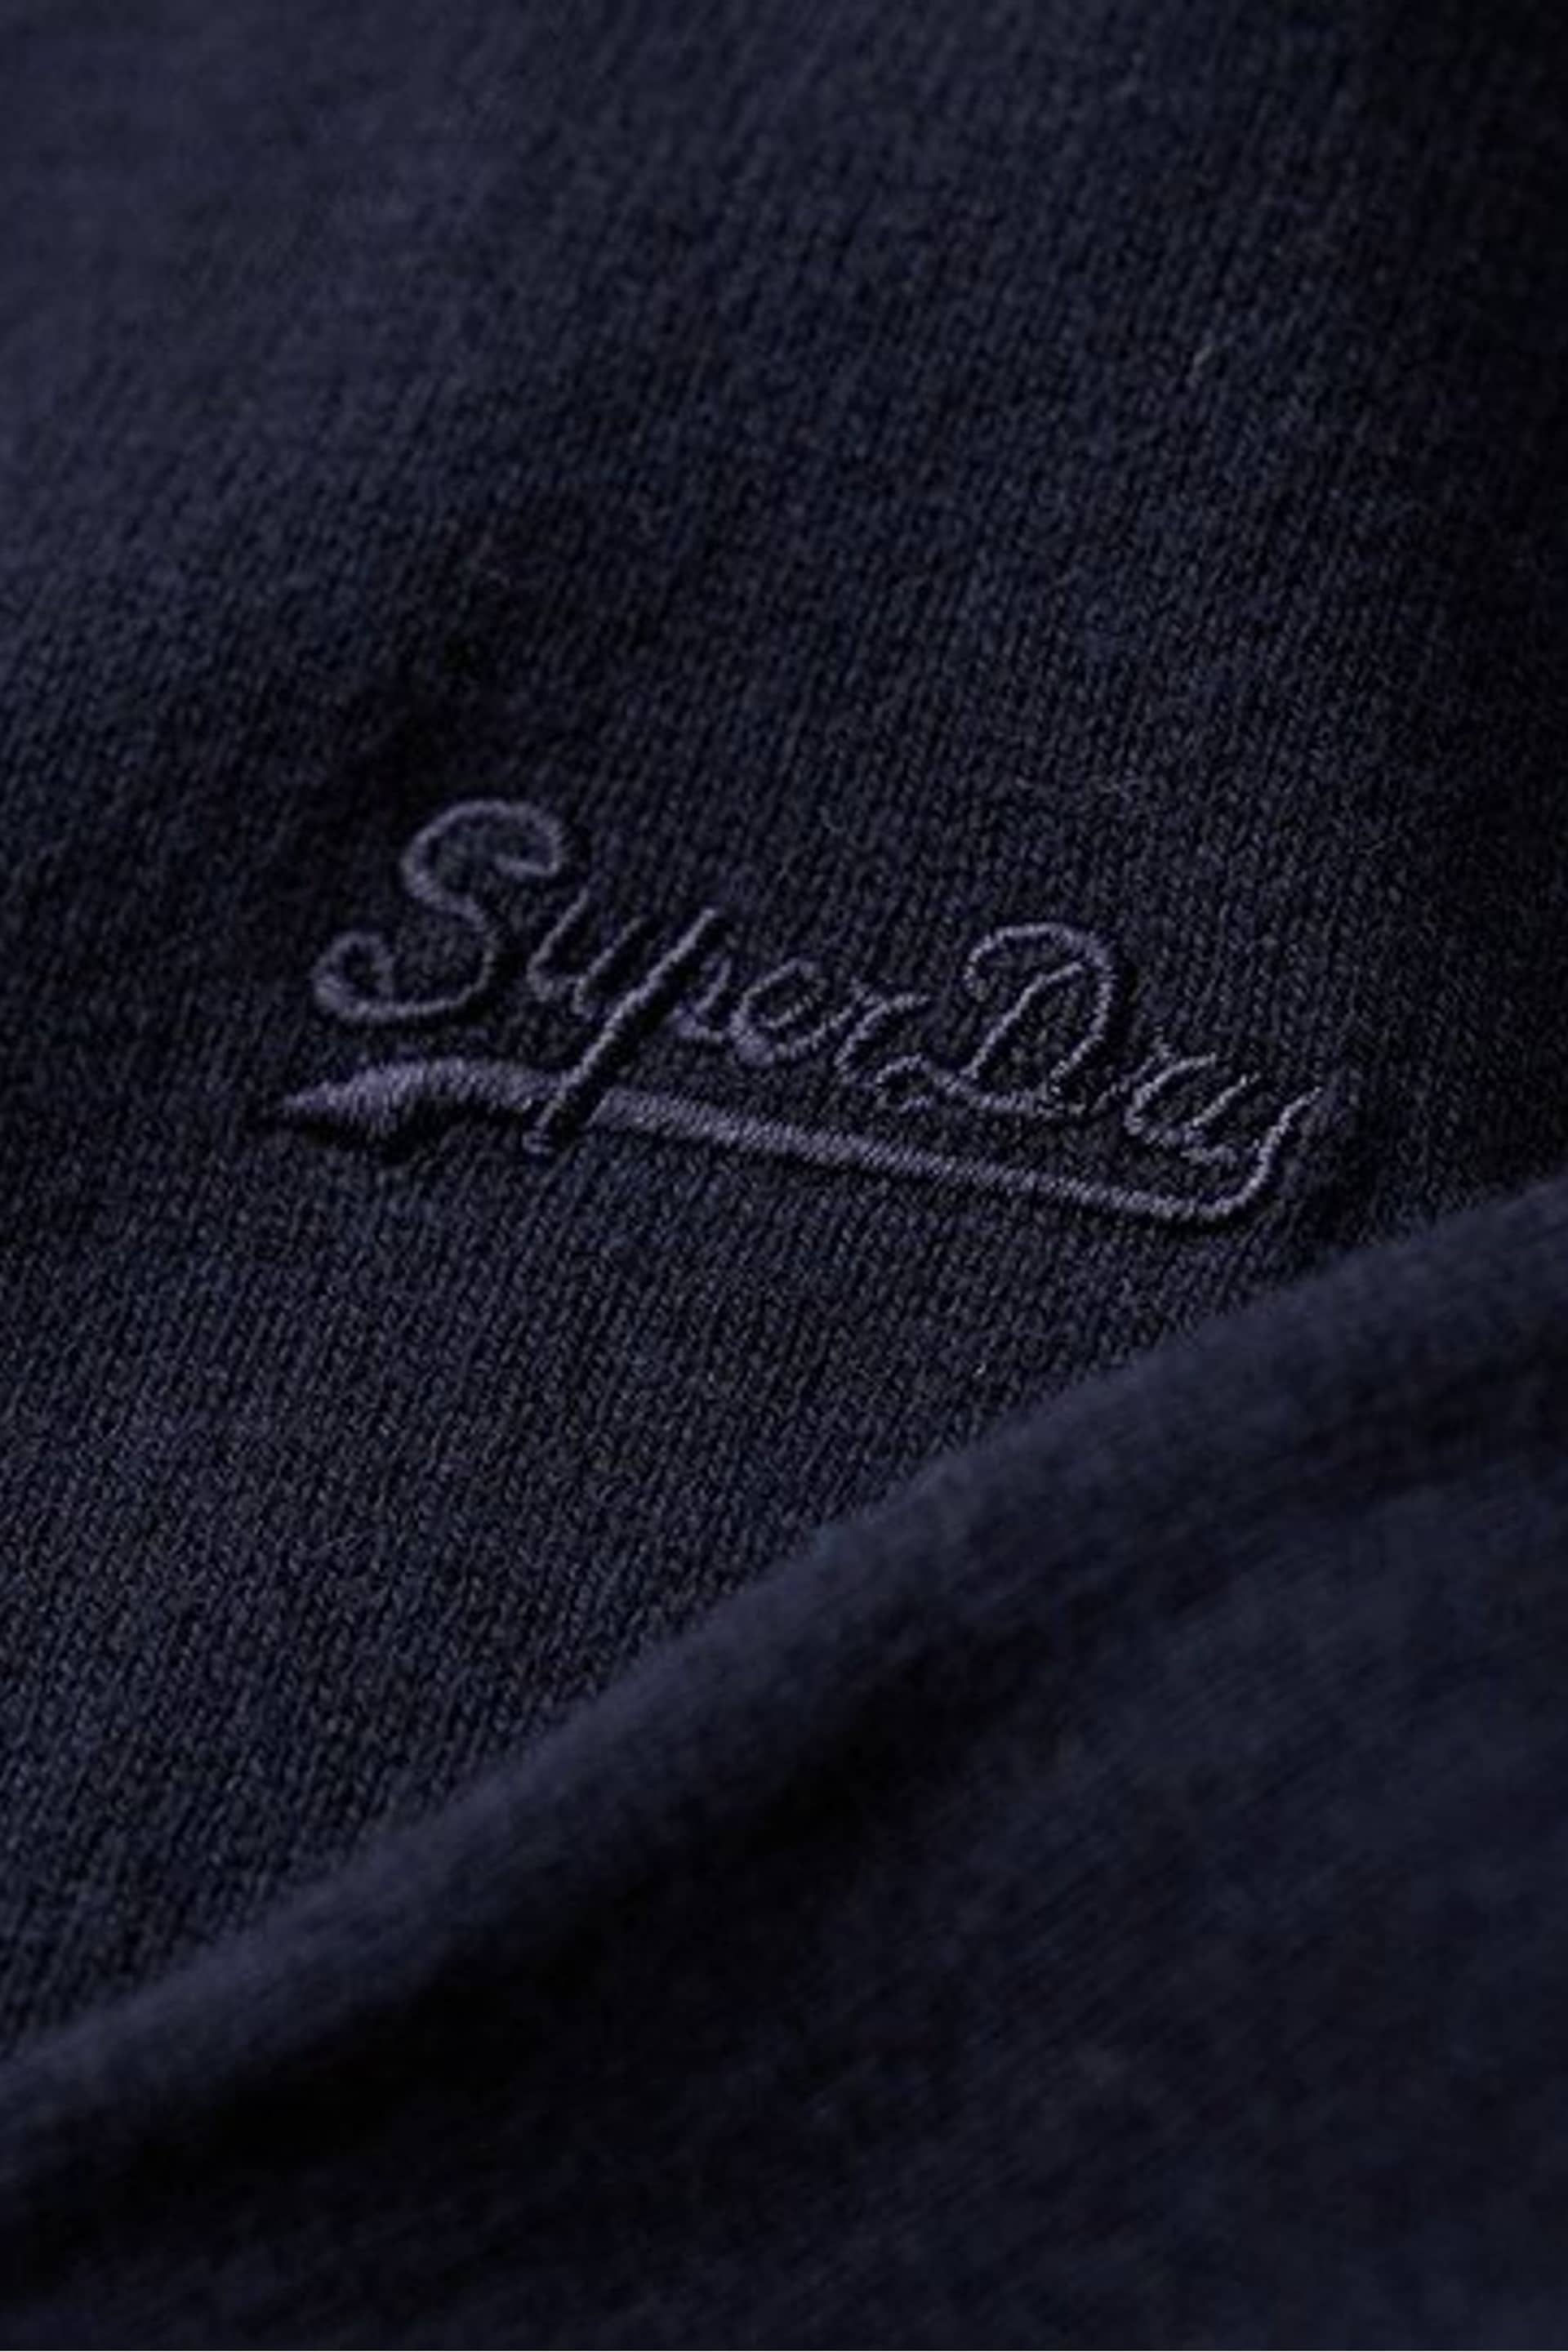 Superdry Blue Henley Cotton Cashmere Knitted Jumper - Image 5 of 6